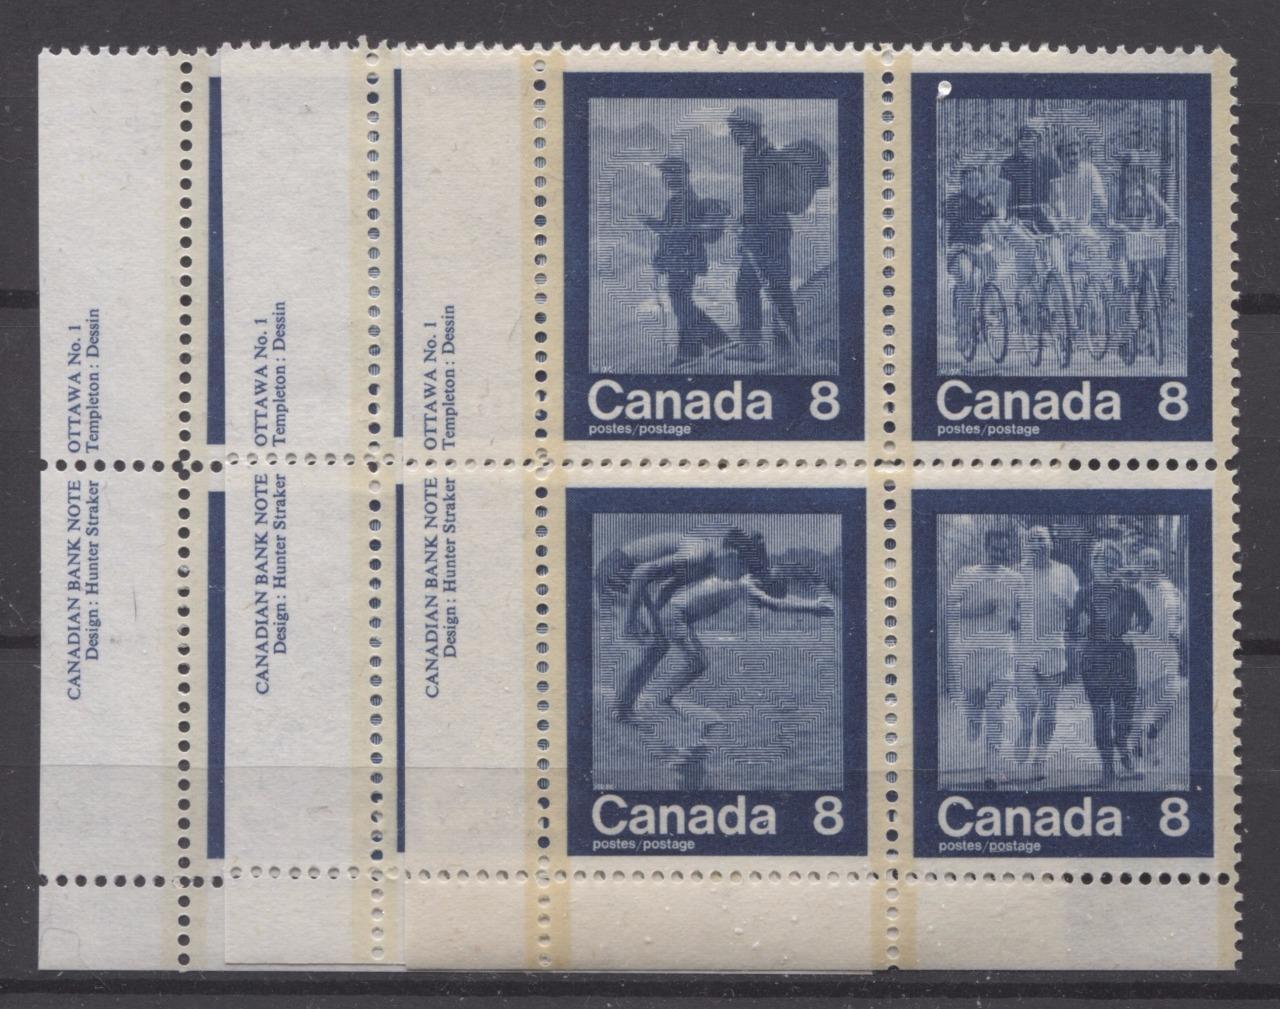 Canada #632i (SG#771) 1974 Summer Sports Issue "Hiking" Paper/Tag Type 4 VF-84 NH Brixton Chrome 